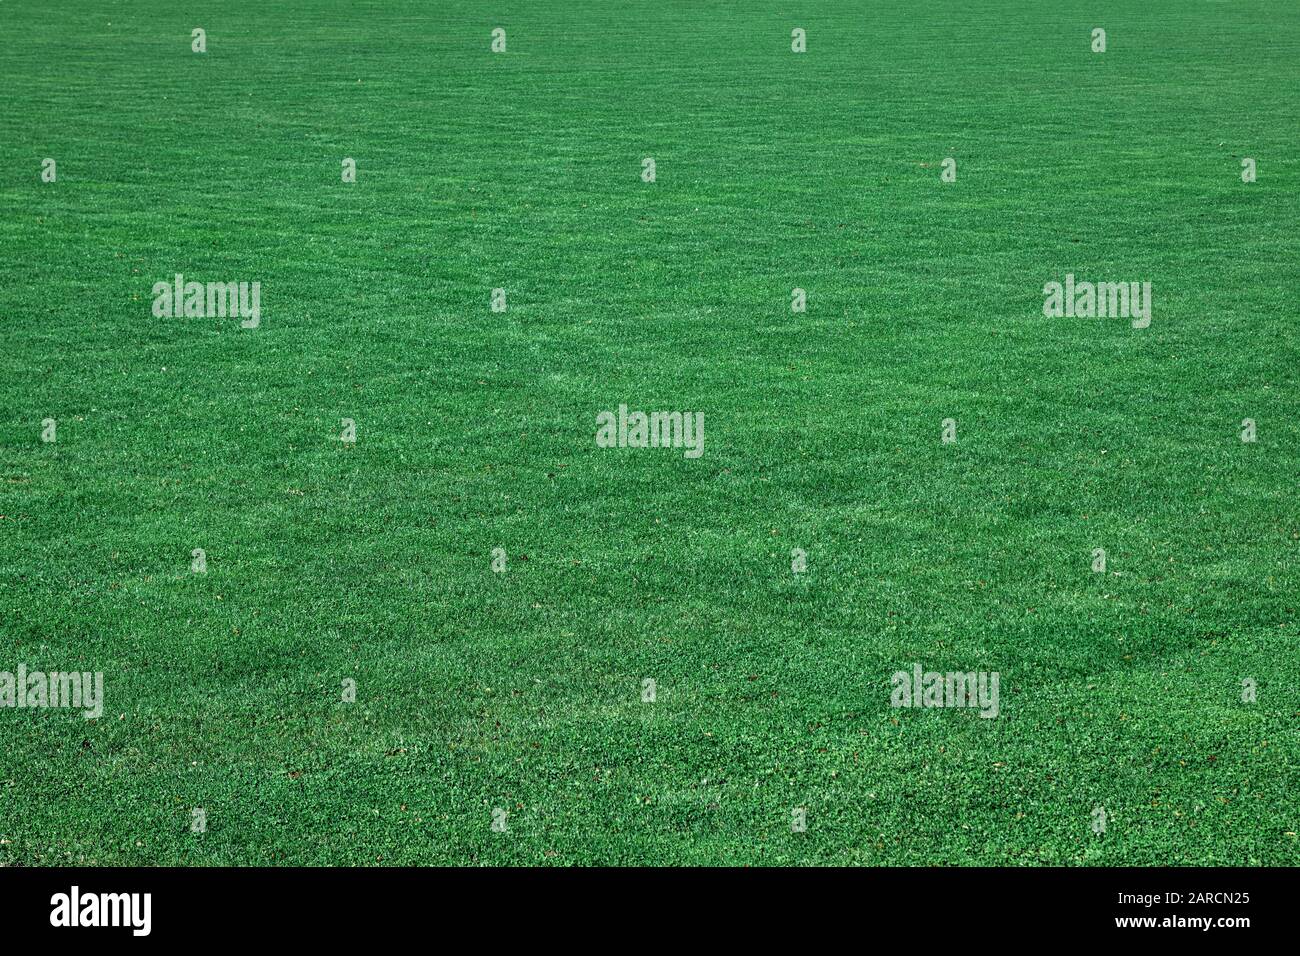 Freshly cut lawn with no weeds. Stock Photo